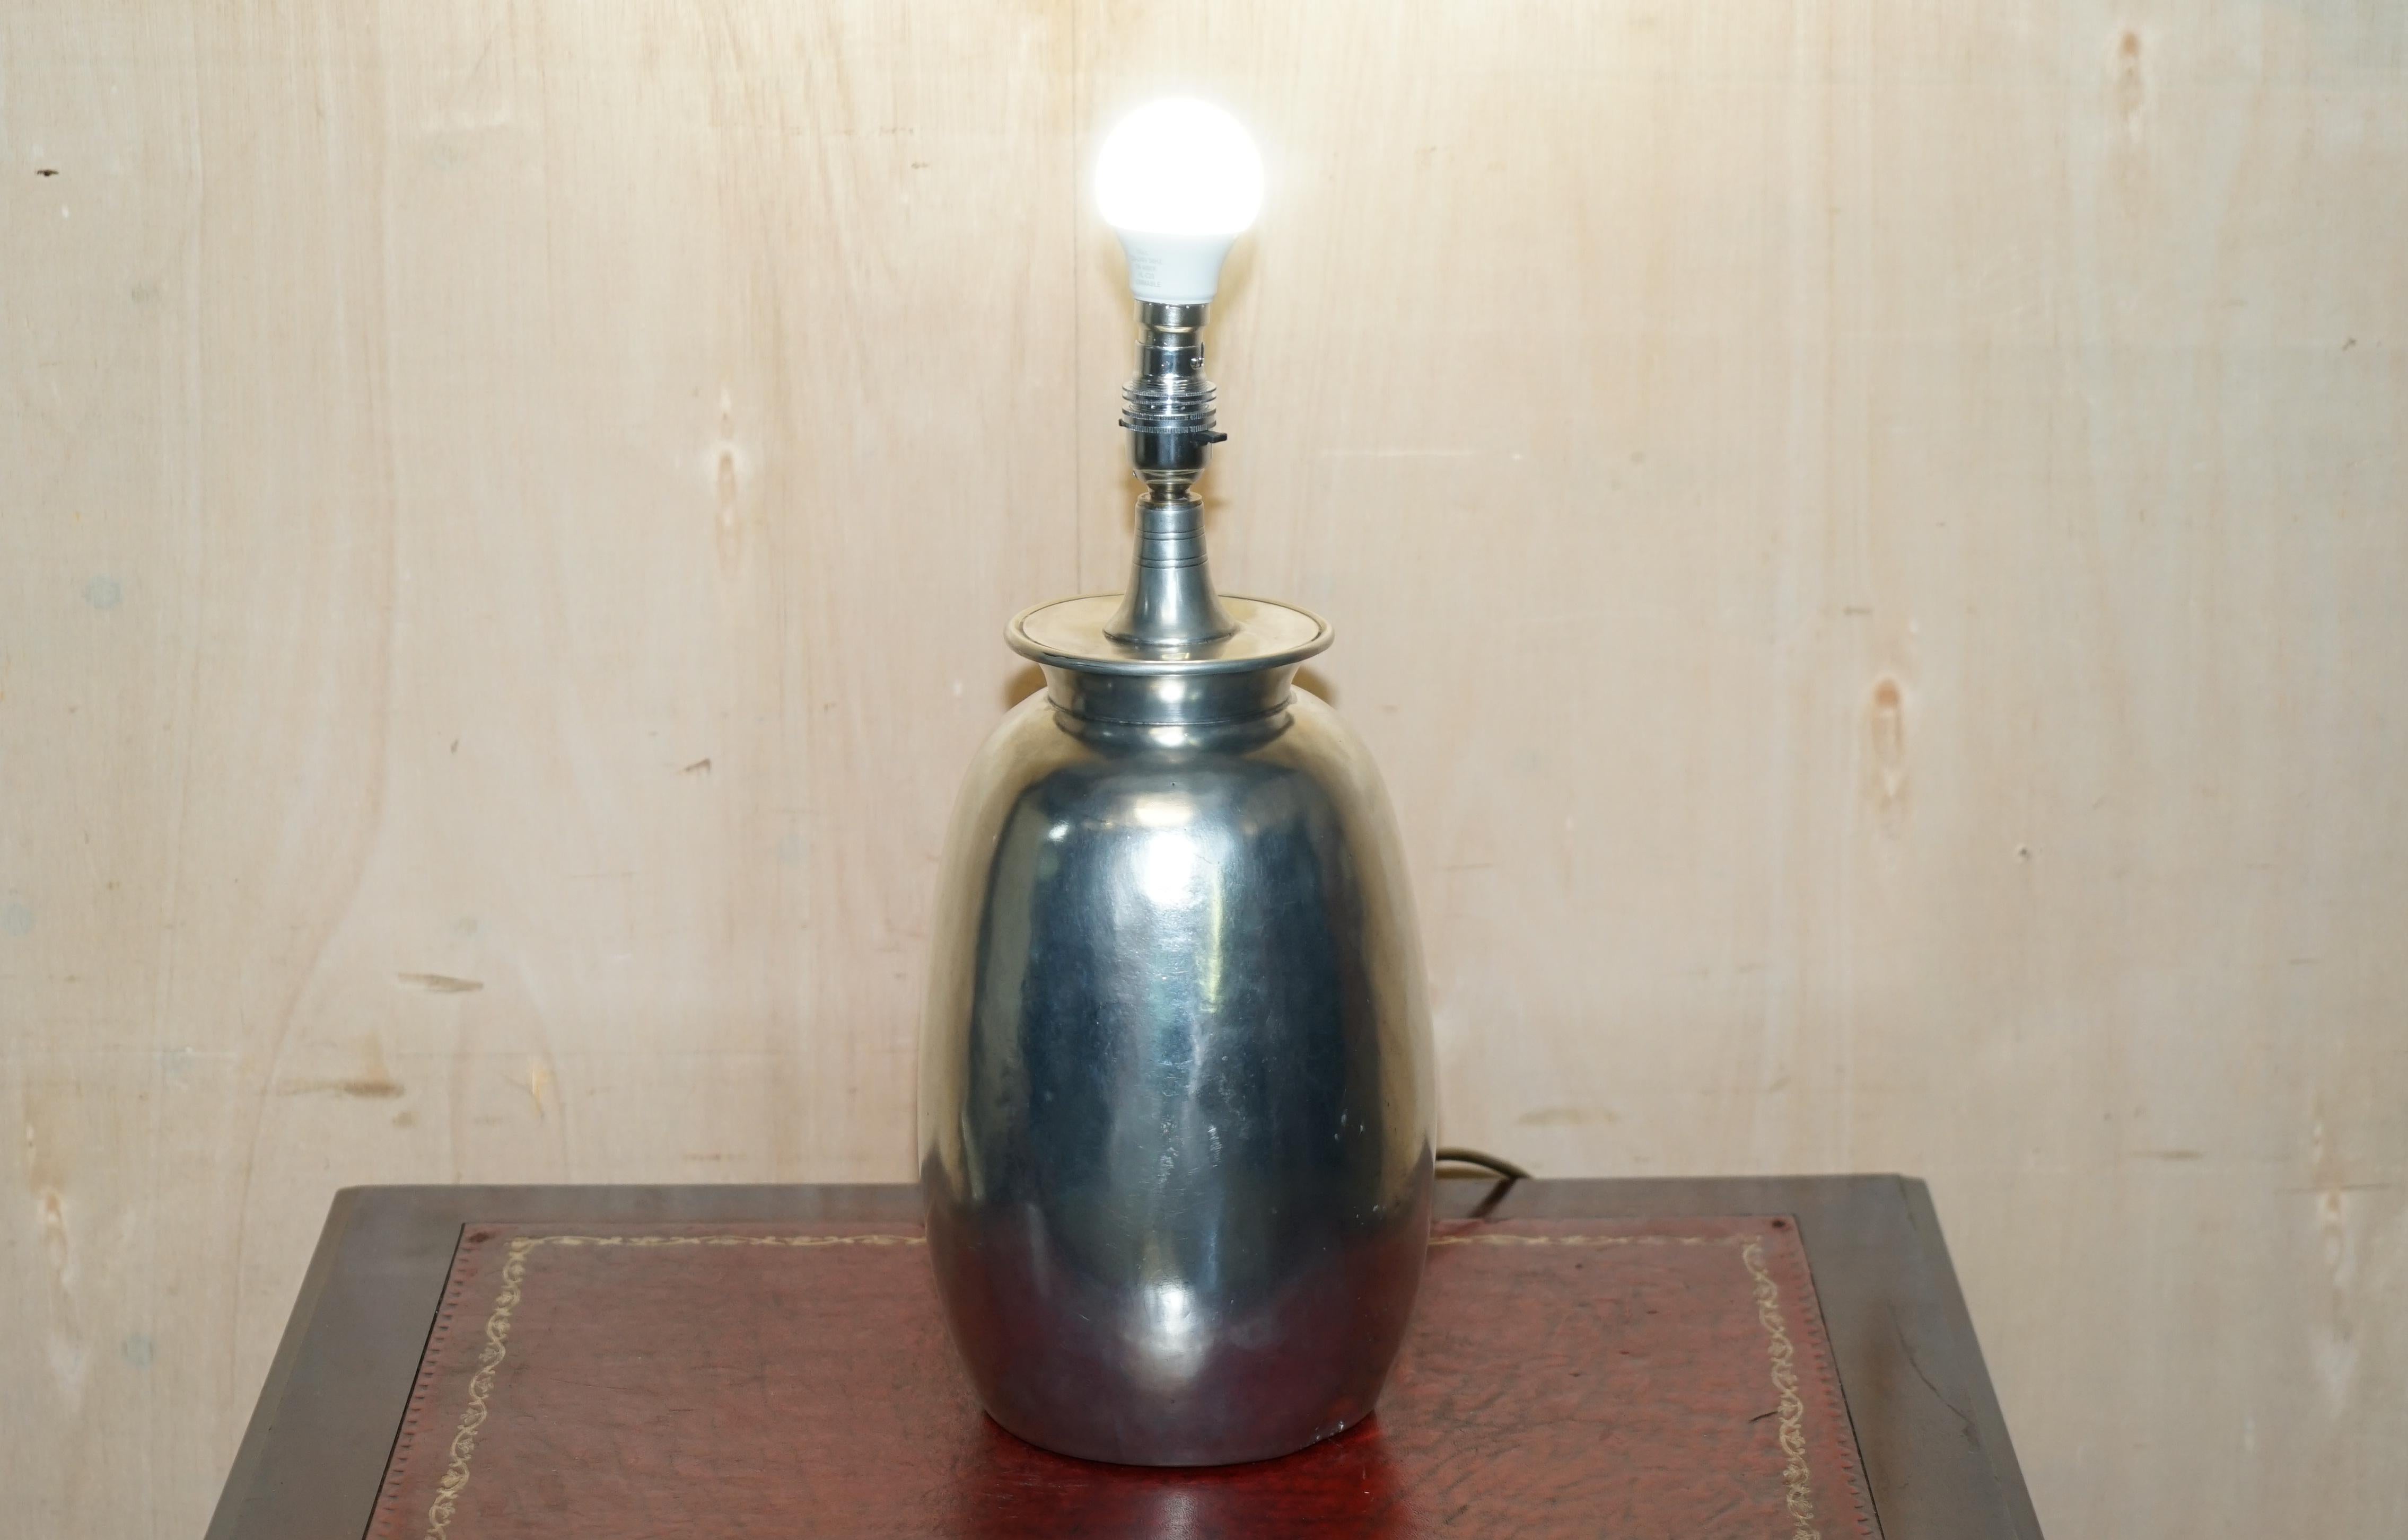 Royal House Antiques

Royal House Antiques is delighted to offer for sale this stunning large Arte Italica Tavola Marinoni Vase / Dome shaped table lamp which is part of a suite

I have a few variations of these lamps, there are two pairs of the